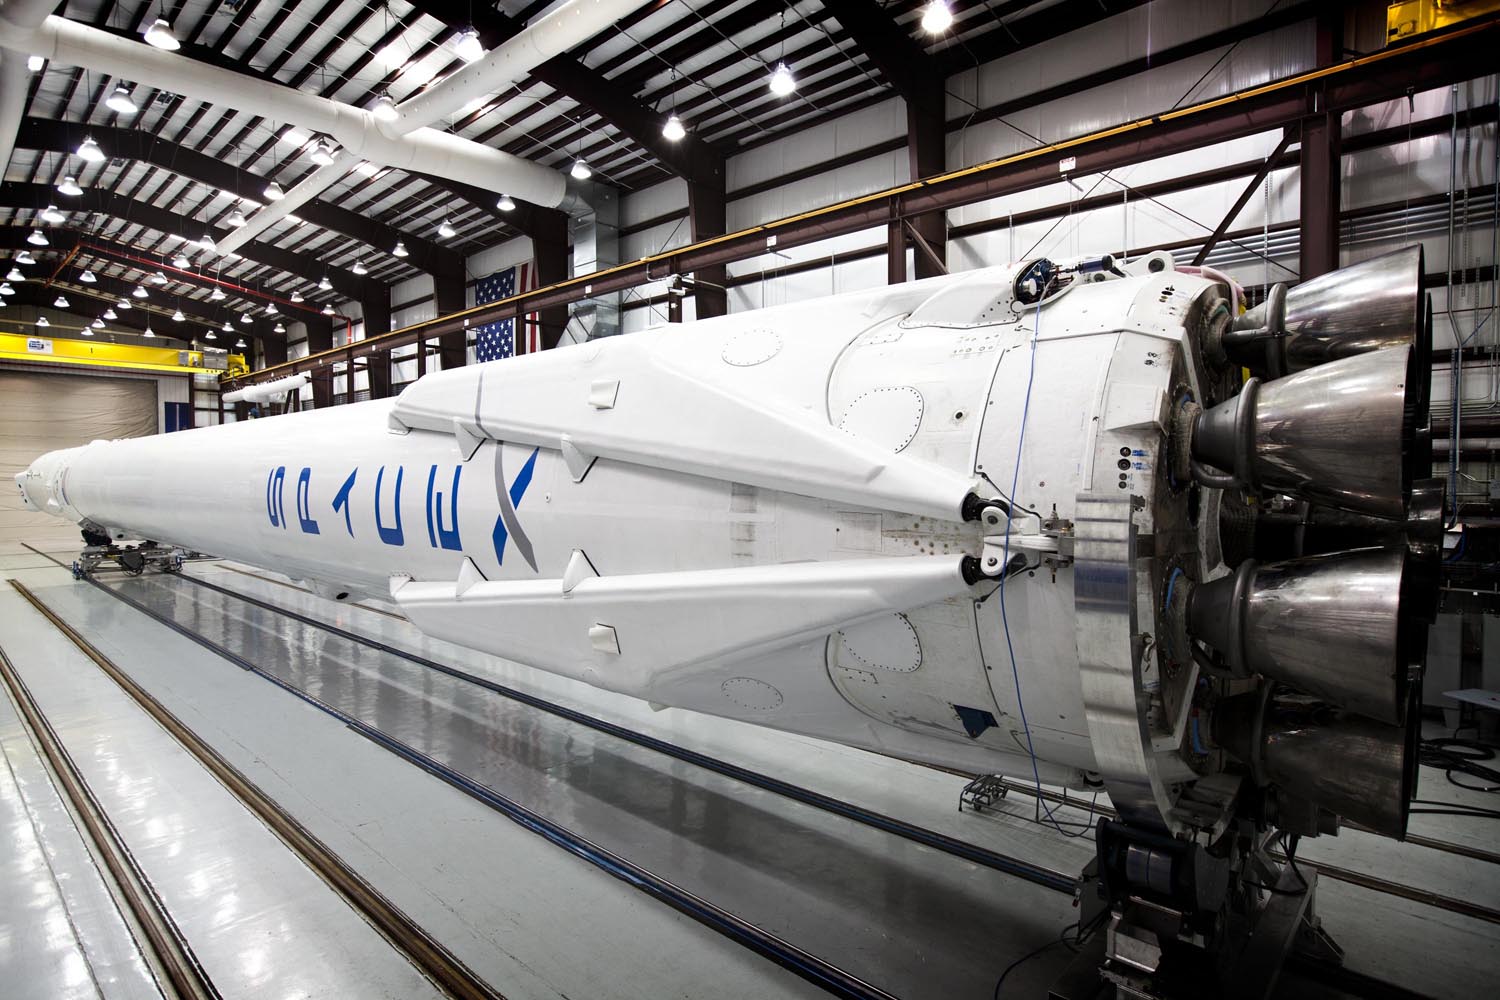 Falcon 9 awaits its upcoming launch in SpaceX's hangar with landing legs attached on March 12, 2014.